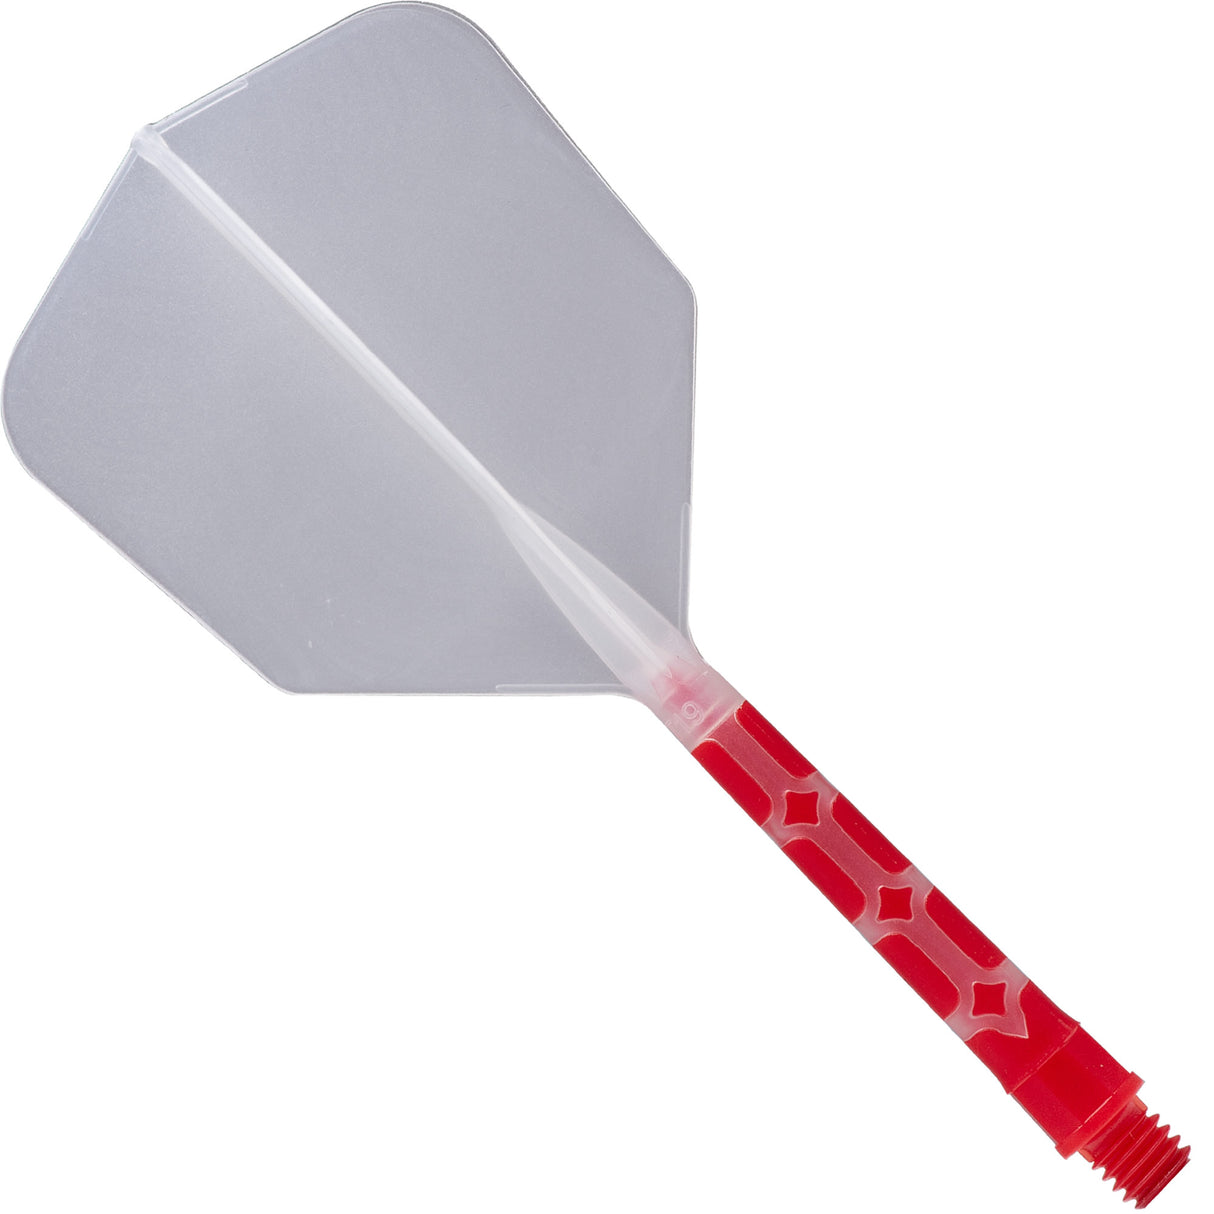 *Cuesoul Rost T19 Integrated Dart Shaft and Flights - Big Wing - Red with Clear Flight